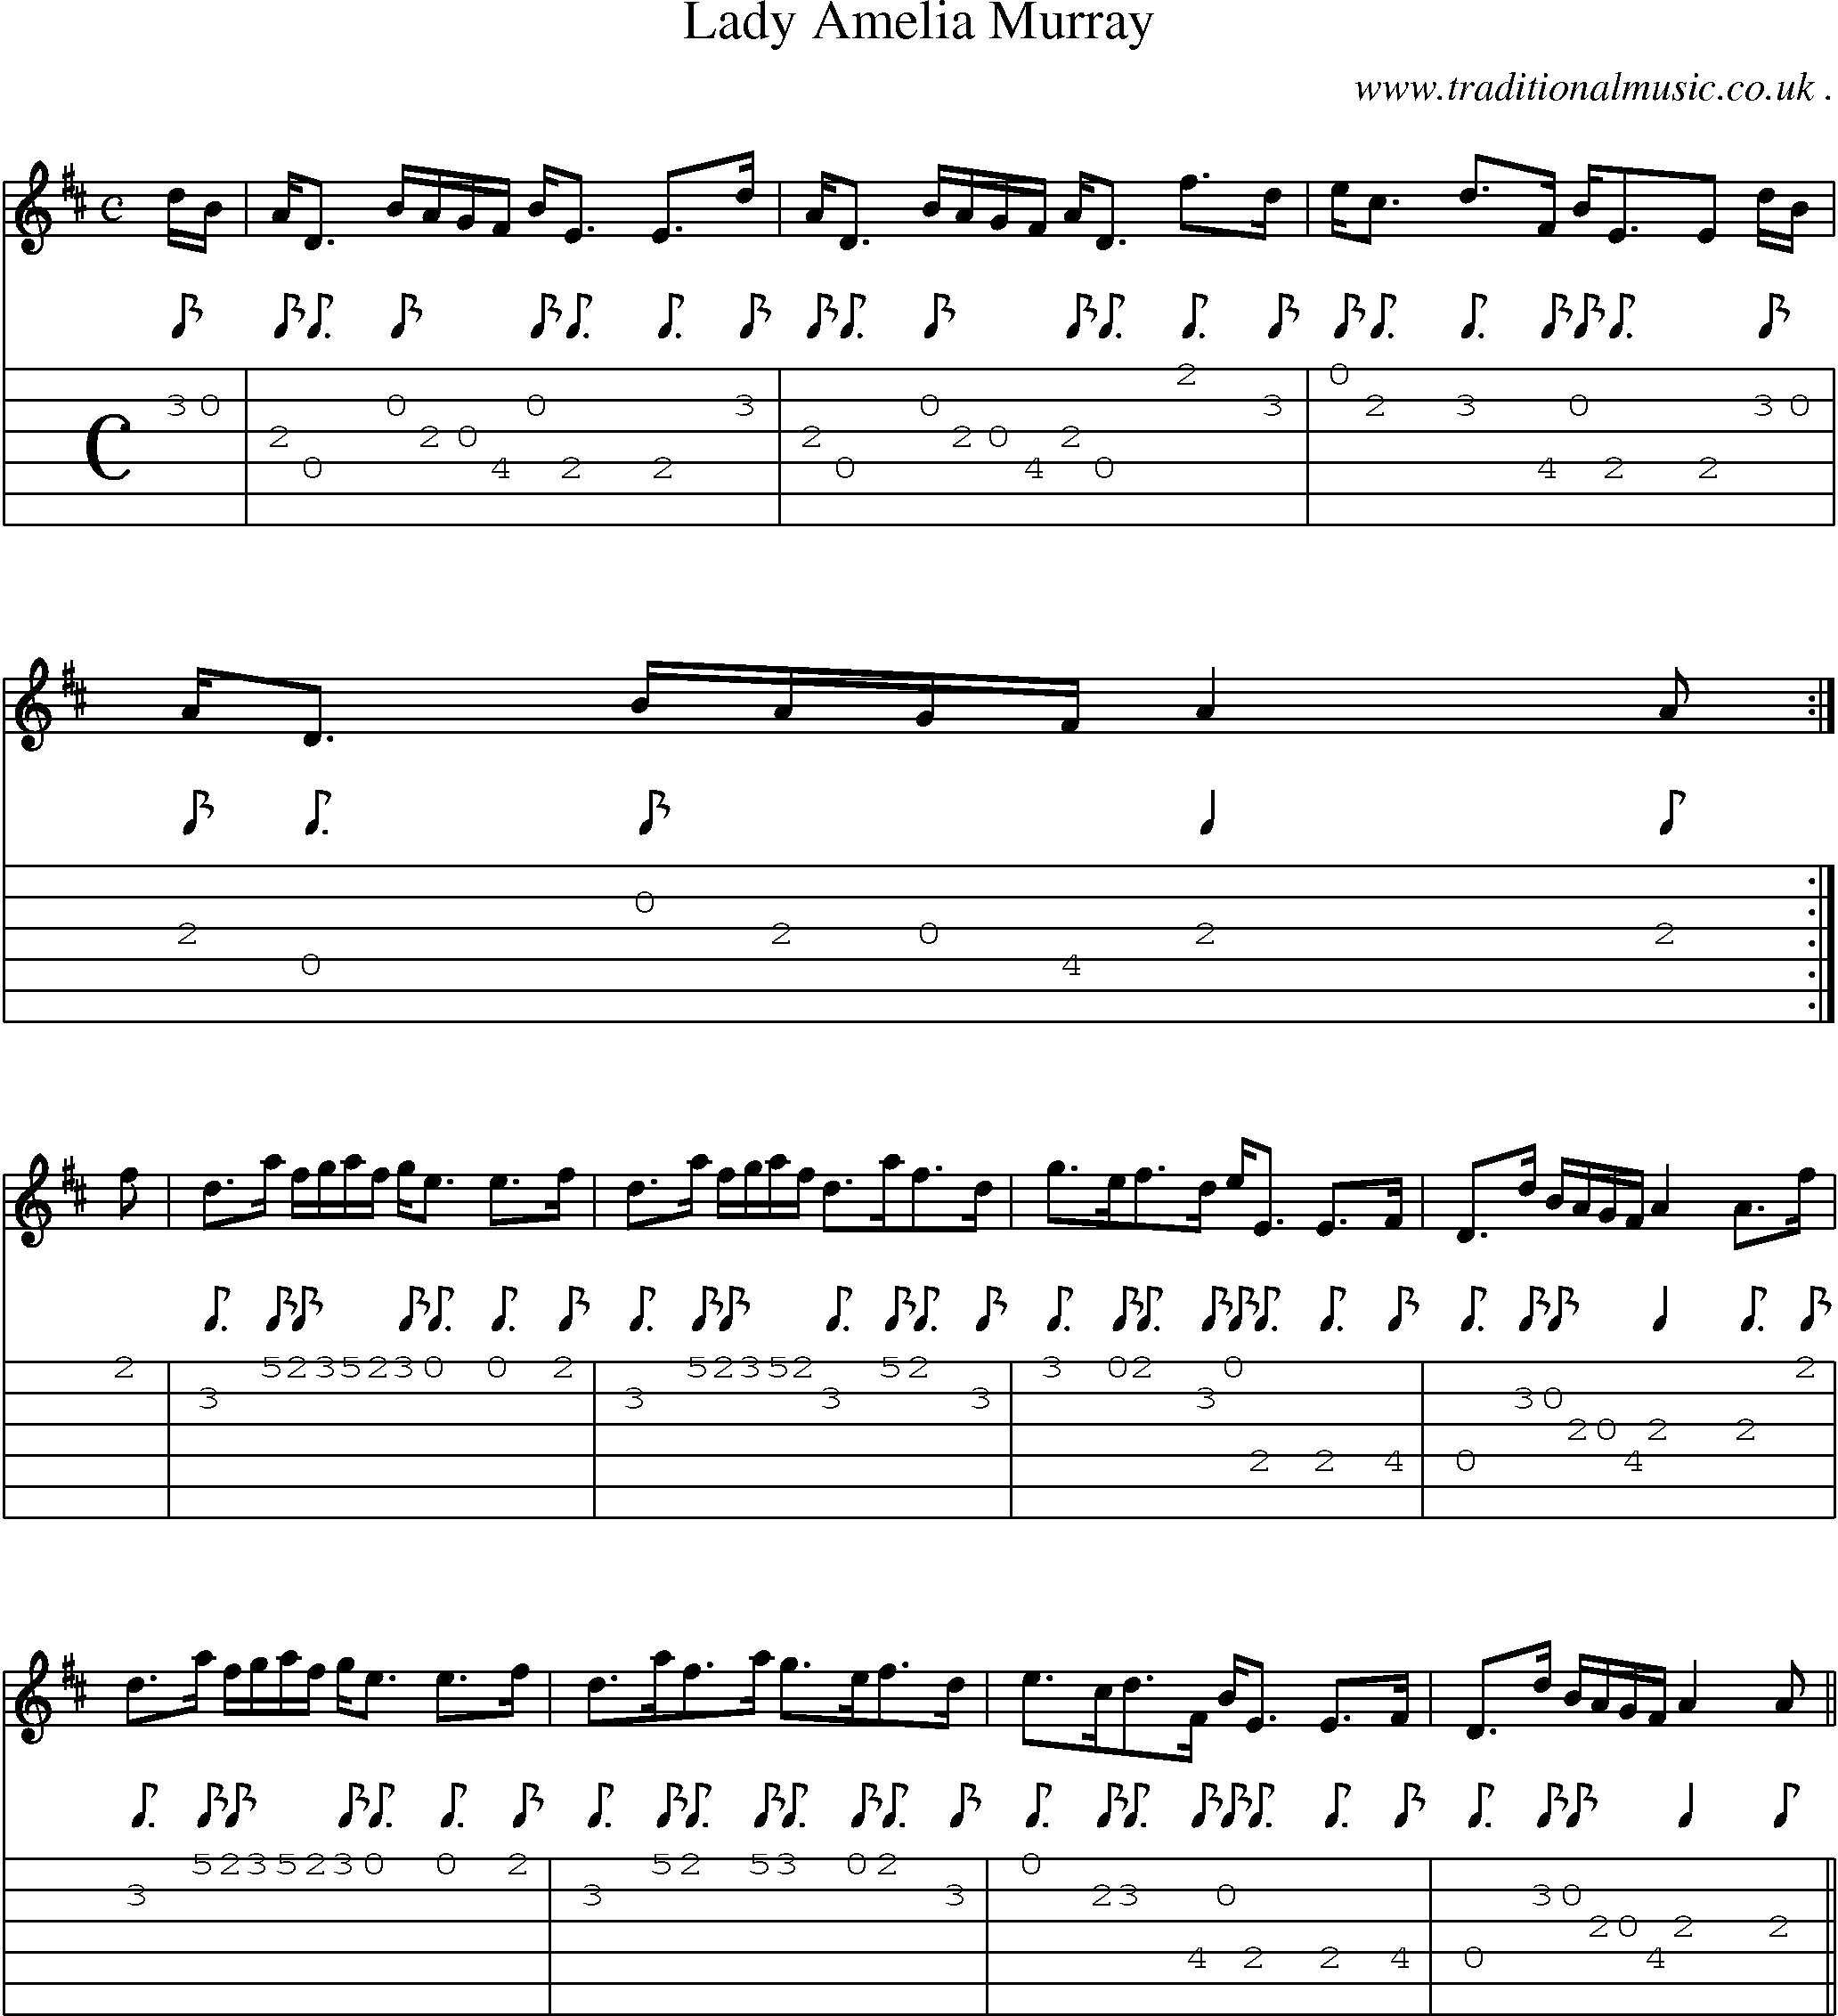 Sheet-music  score, Chords and Guitar Tabs for Lady Amelia Murray